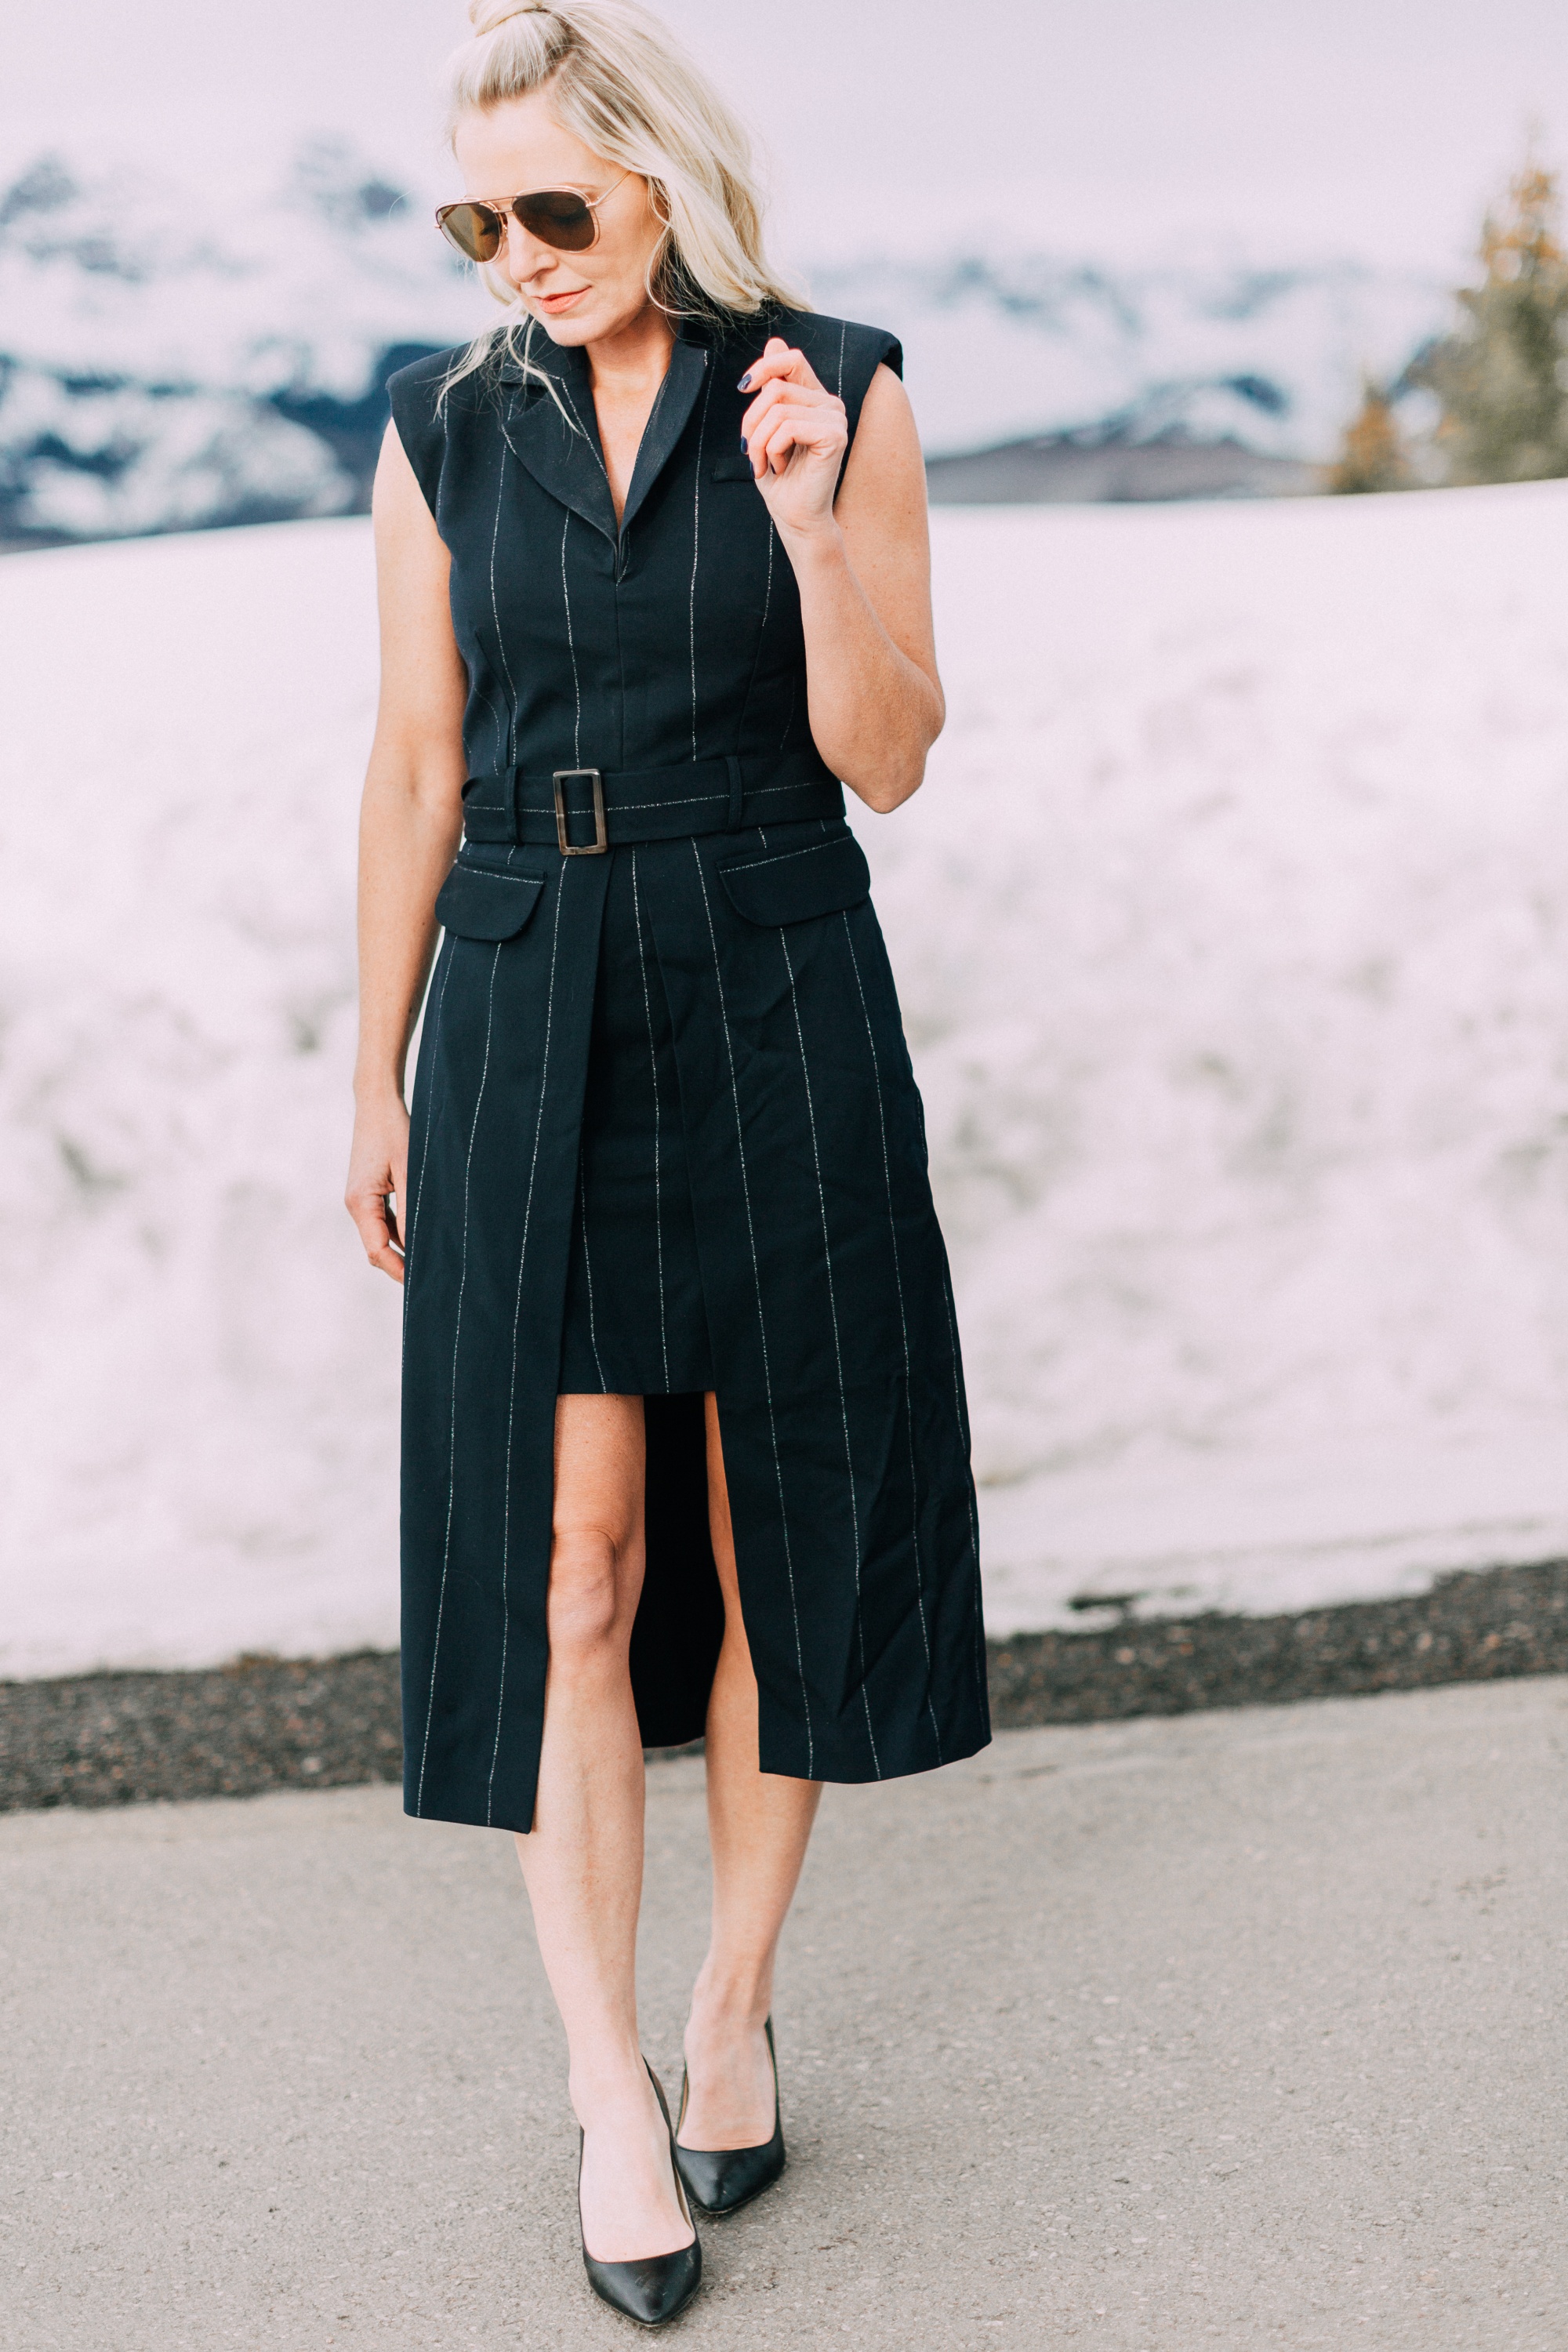 Spring Office Dress, fashion blogger Erin Busbee of BusbeeStyle.com wearing a navy pinstripe dress from Asos with black Jimmy Choo pumps in Telluride, Colorado, talking about dresses for the office